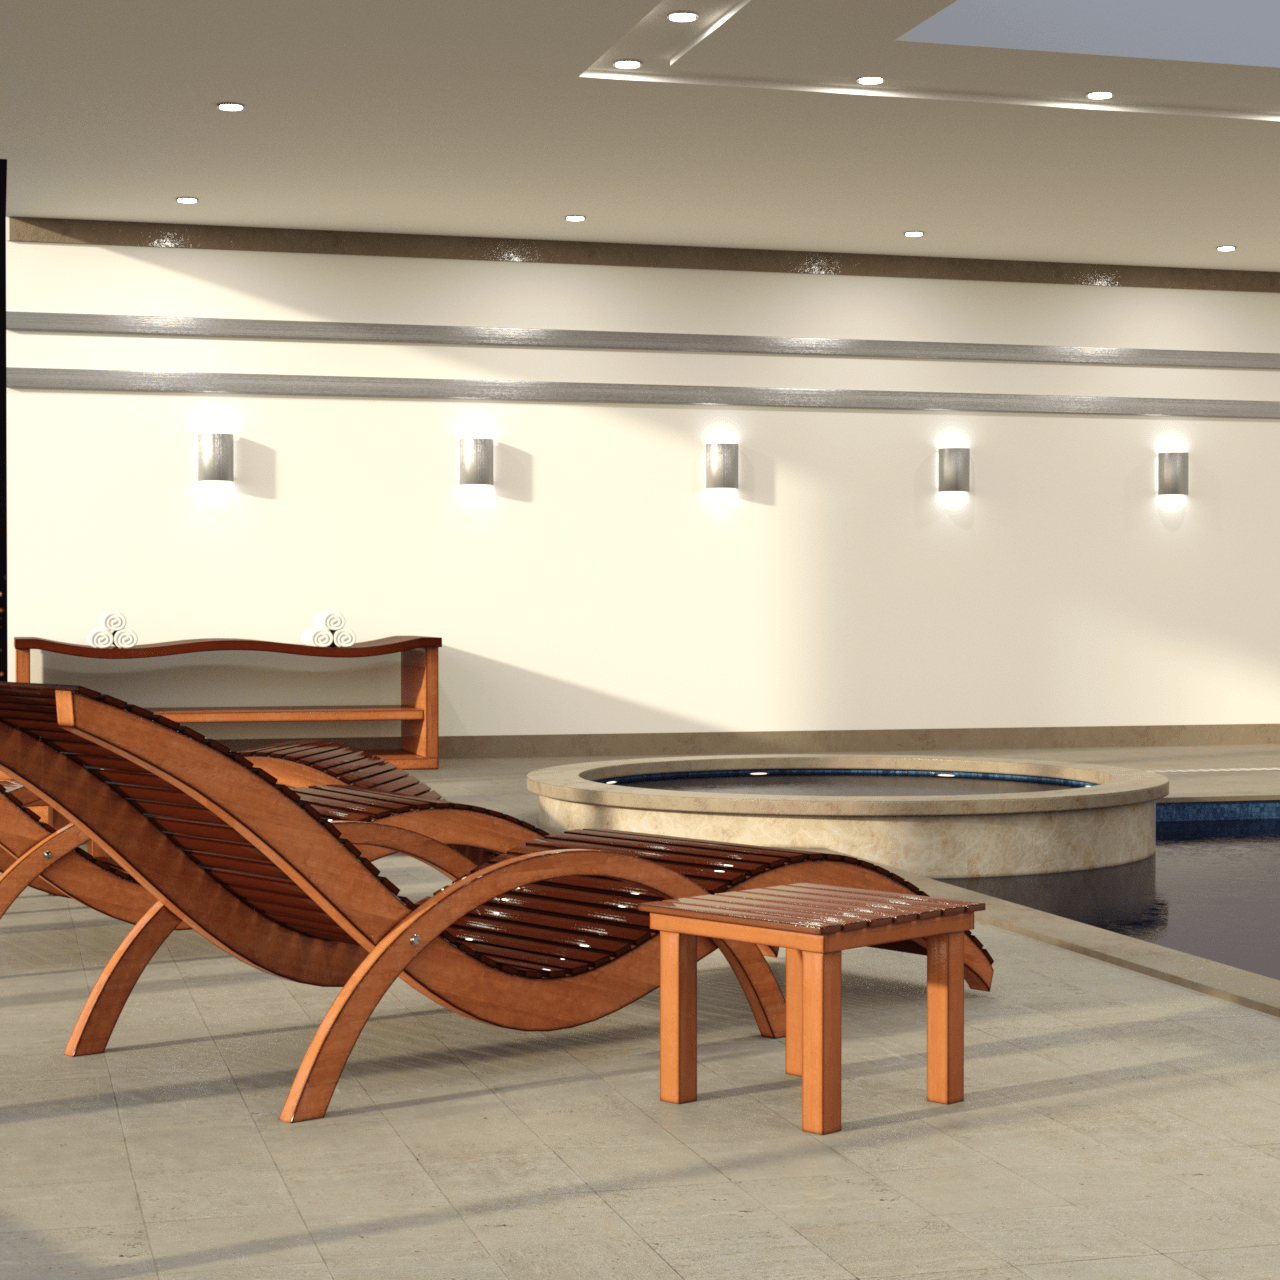 3d model of a deck chair with small table in front of the jacuzzi